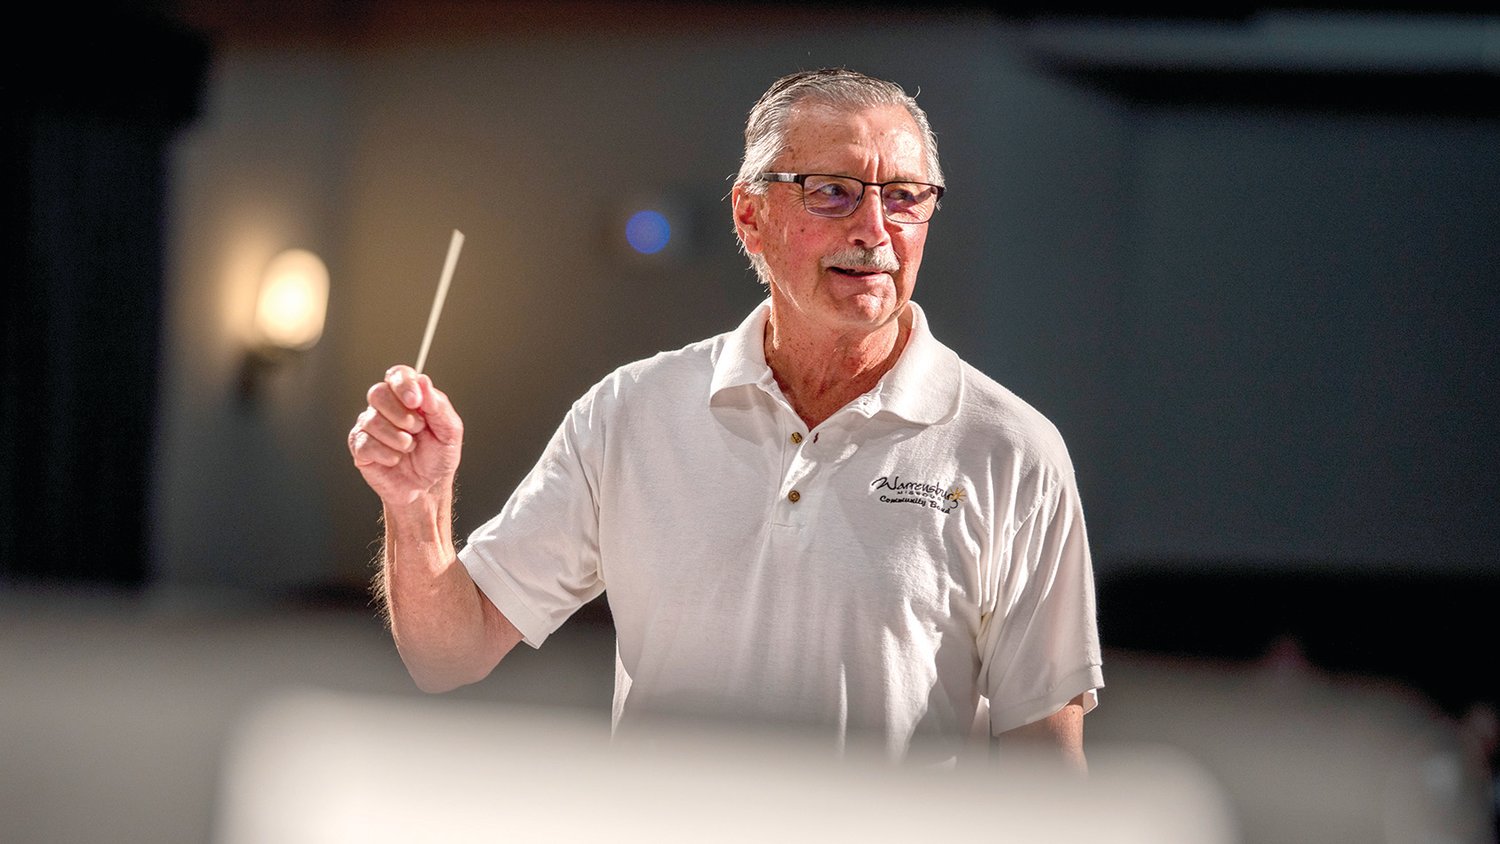 University of Central Missouri Professor Emeritus of Music Jim Gai, one of two conductors for the evening, leads the community band through a piece during the President’s Lawn Concert on Monday, July 25, in Hendrick’s Hall. The performance was moved indoors due to weather conditions.